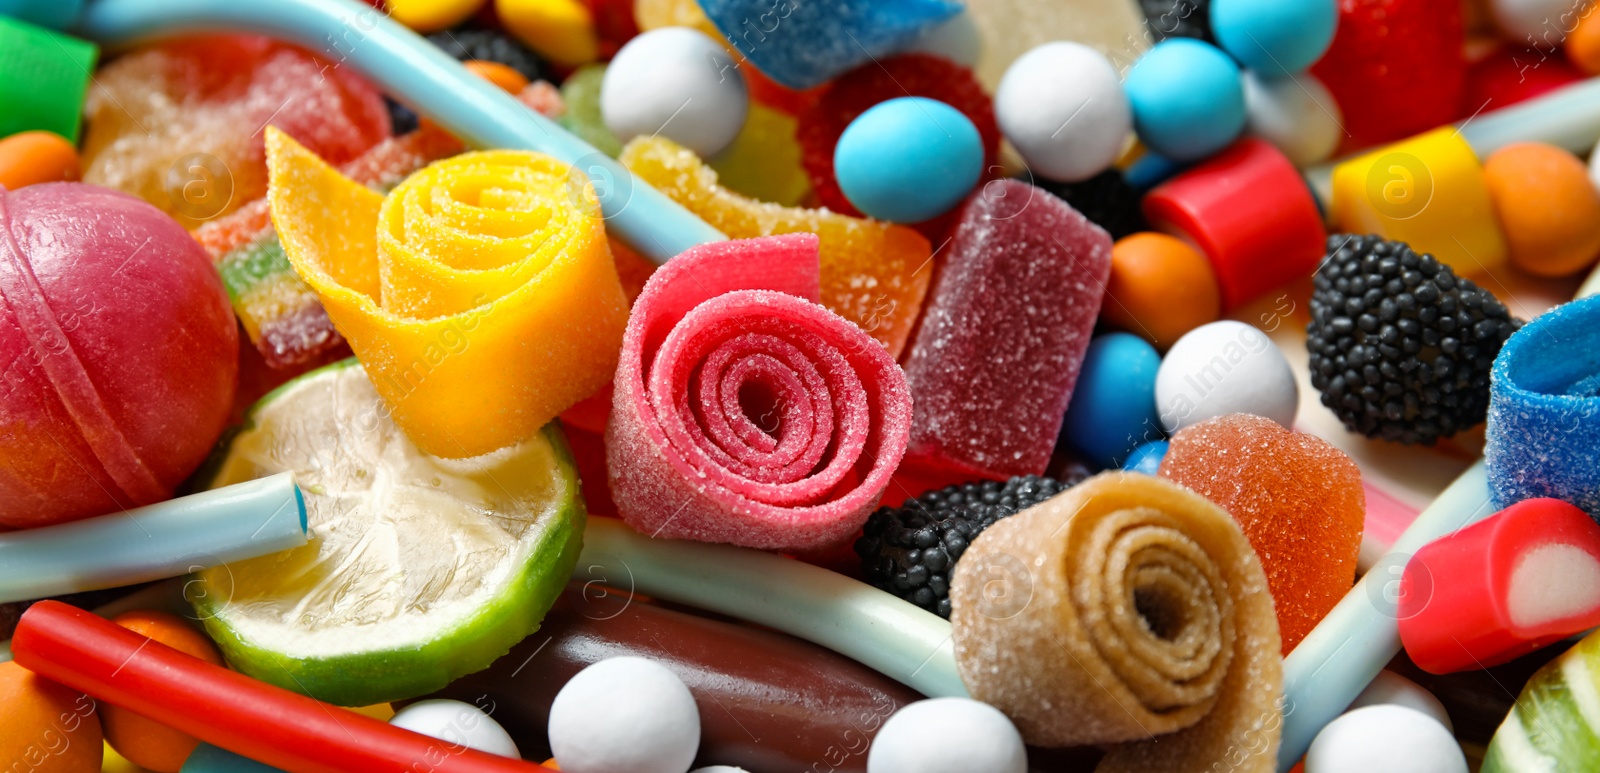 Image of Many different yummy candies as background. Banner design 